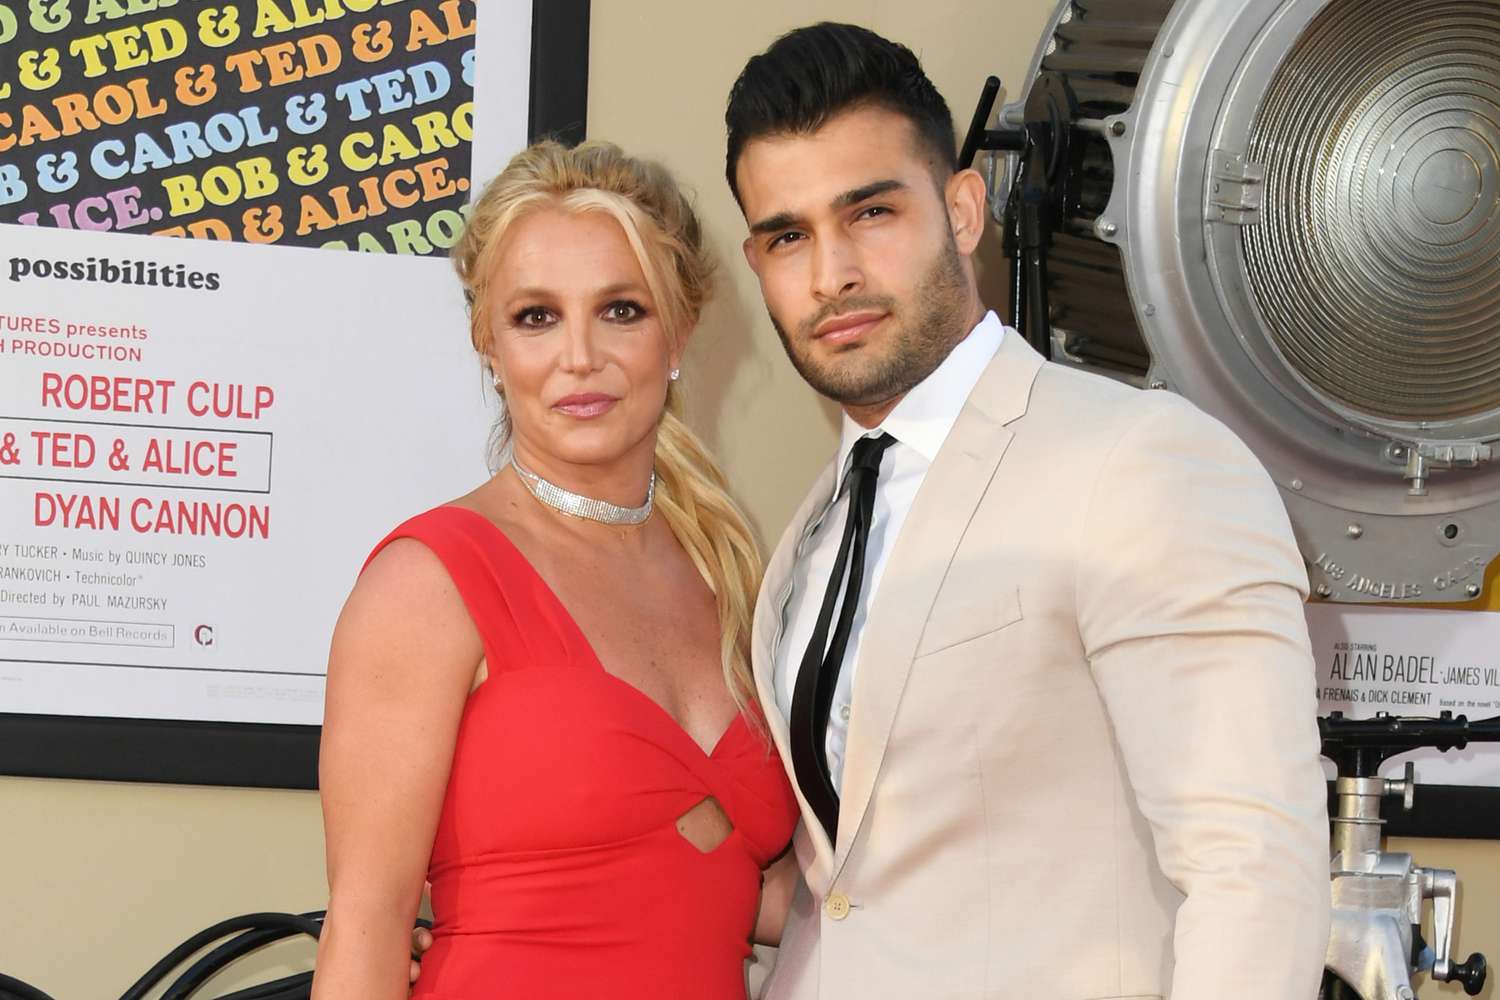 HOLLYWOOD, CALIFORNIA - JULY 22: Britney Spears and Sam Asghari attend Sony Pictures' "Once Upon A Time...In Hollywood" Los Angeles Premiere on July 22, 2019 in Hollywood, California. (Photo by Jon Kopaloff/FilmMagic)